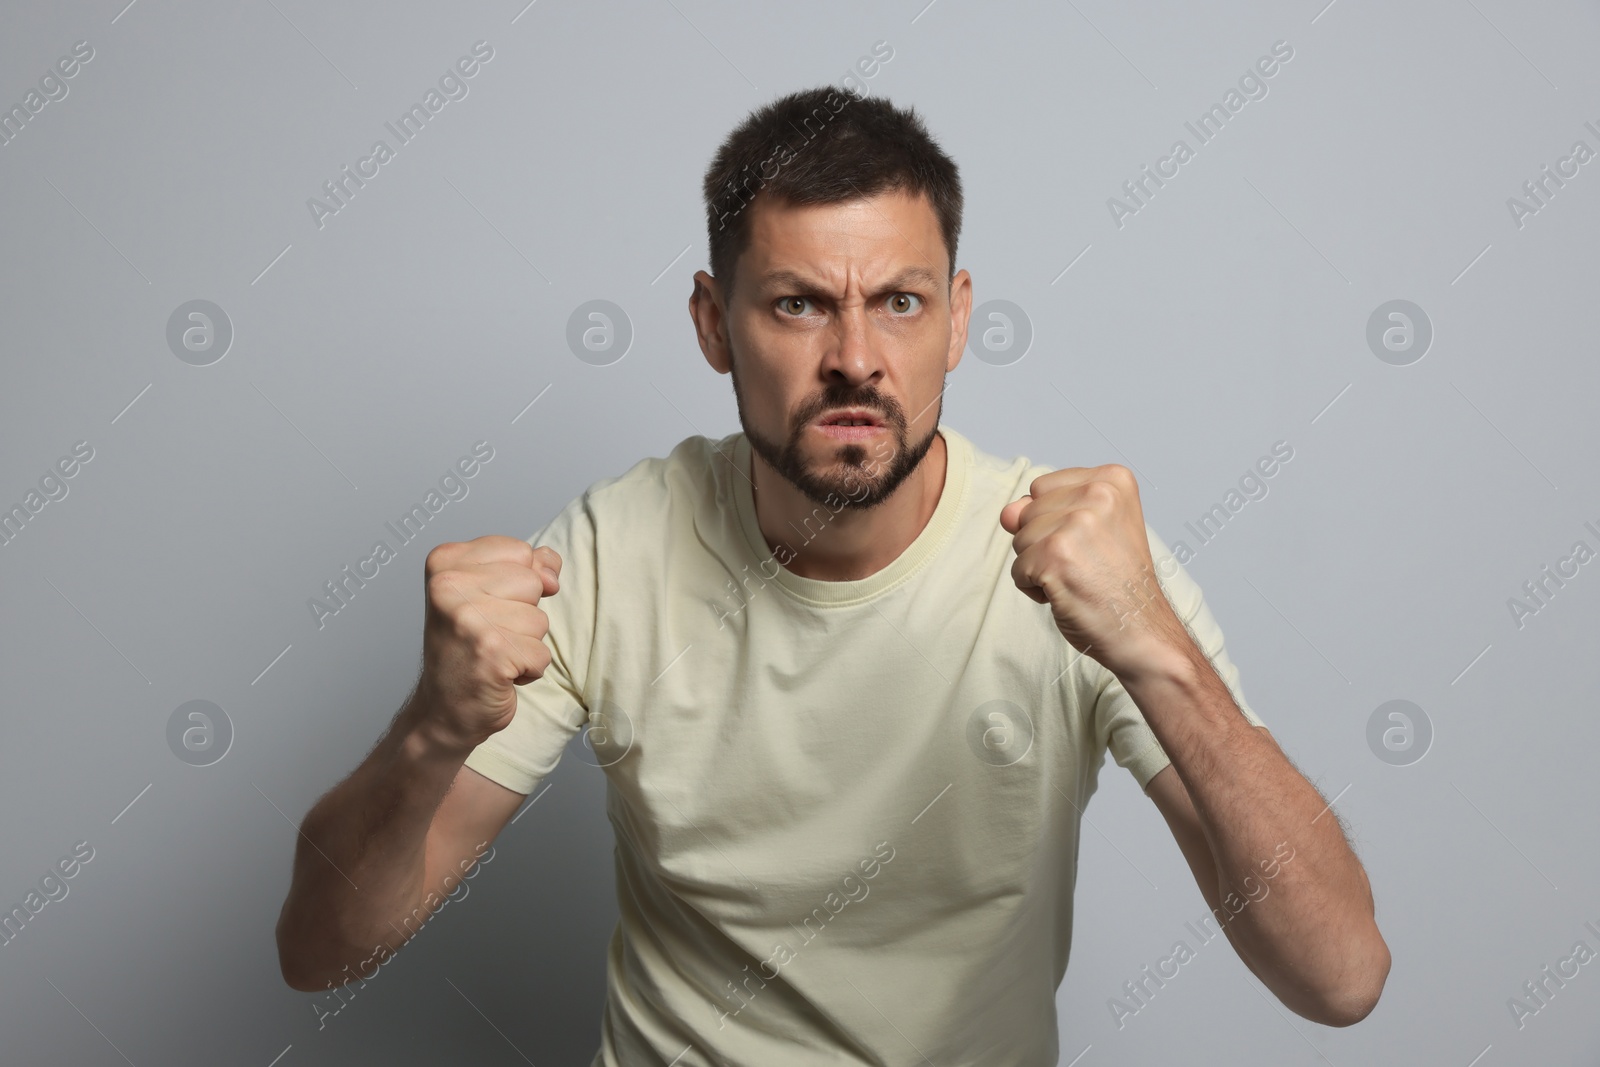 Photo of Aggressive man ready to fight on grey background